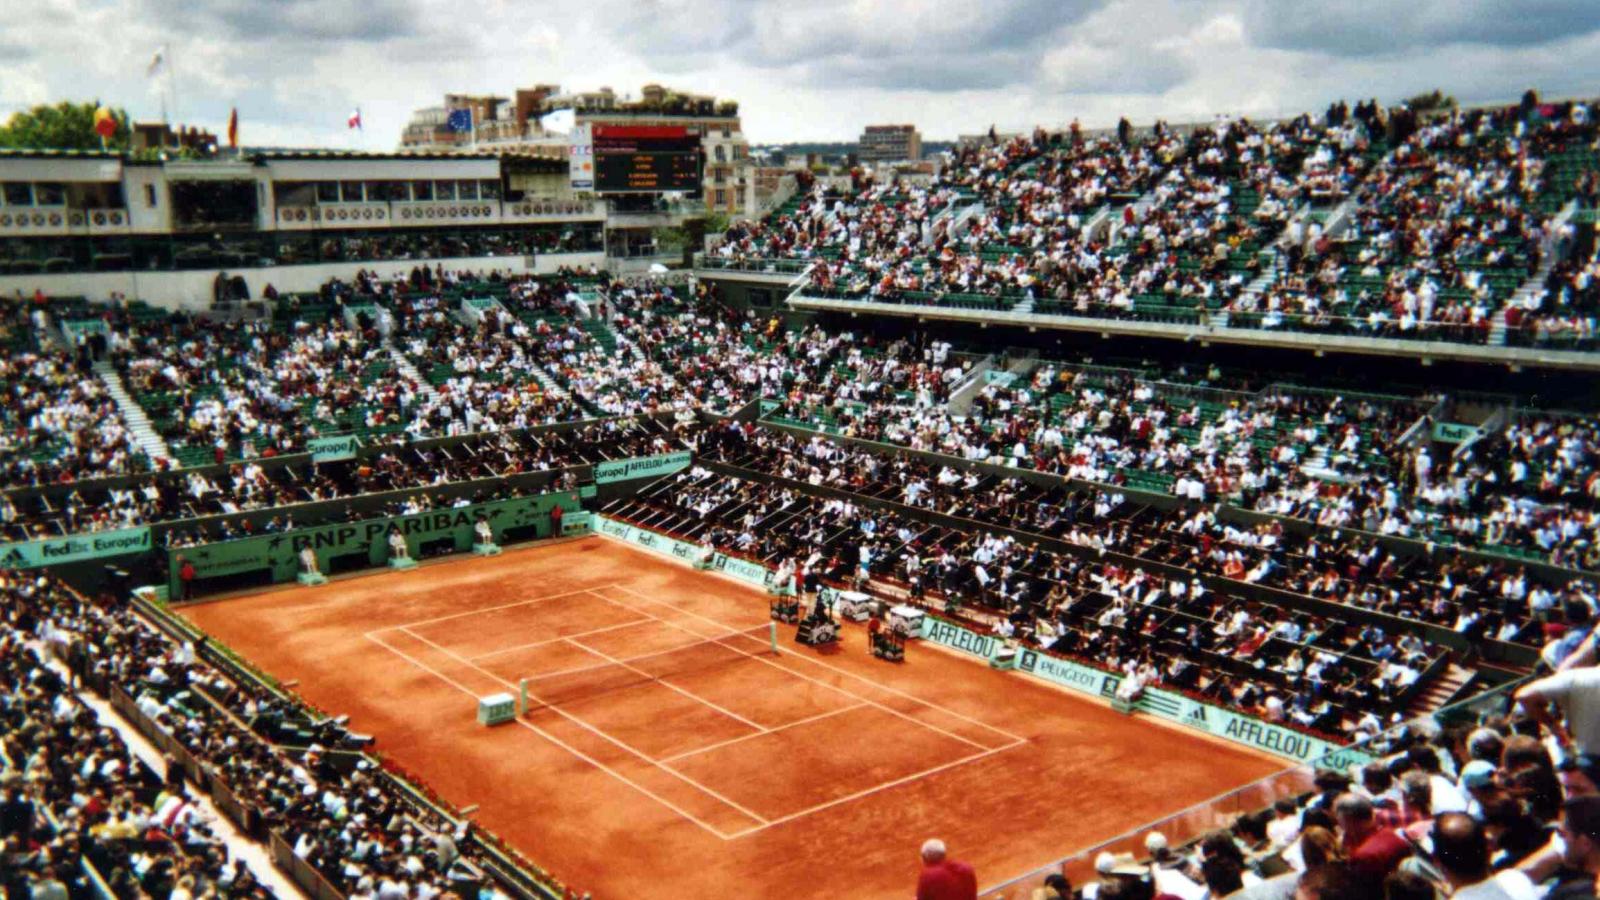 Yellow balls on red clay at the Roland-Garros